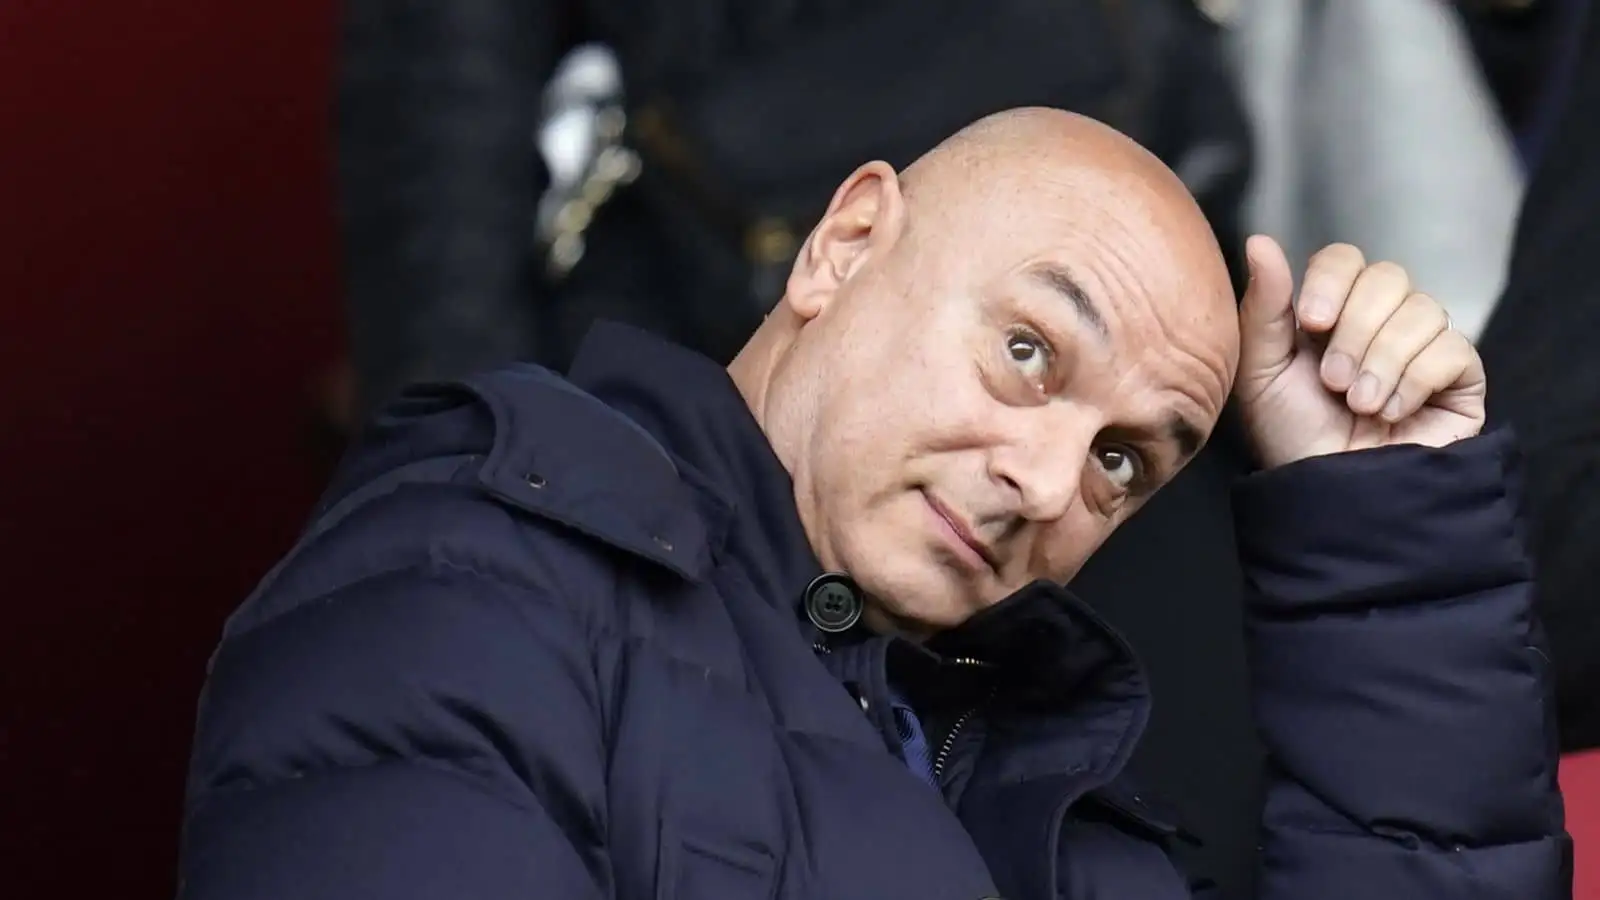 Tottenham Hotspur chairman Daniel Levy in the stands ahead of the Premier League match at St Mary's Stadium, Southampton